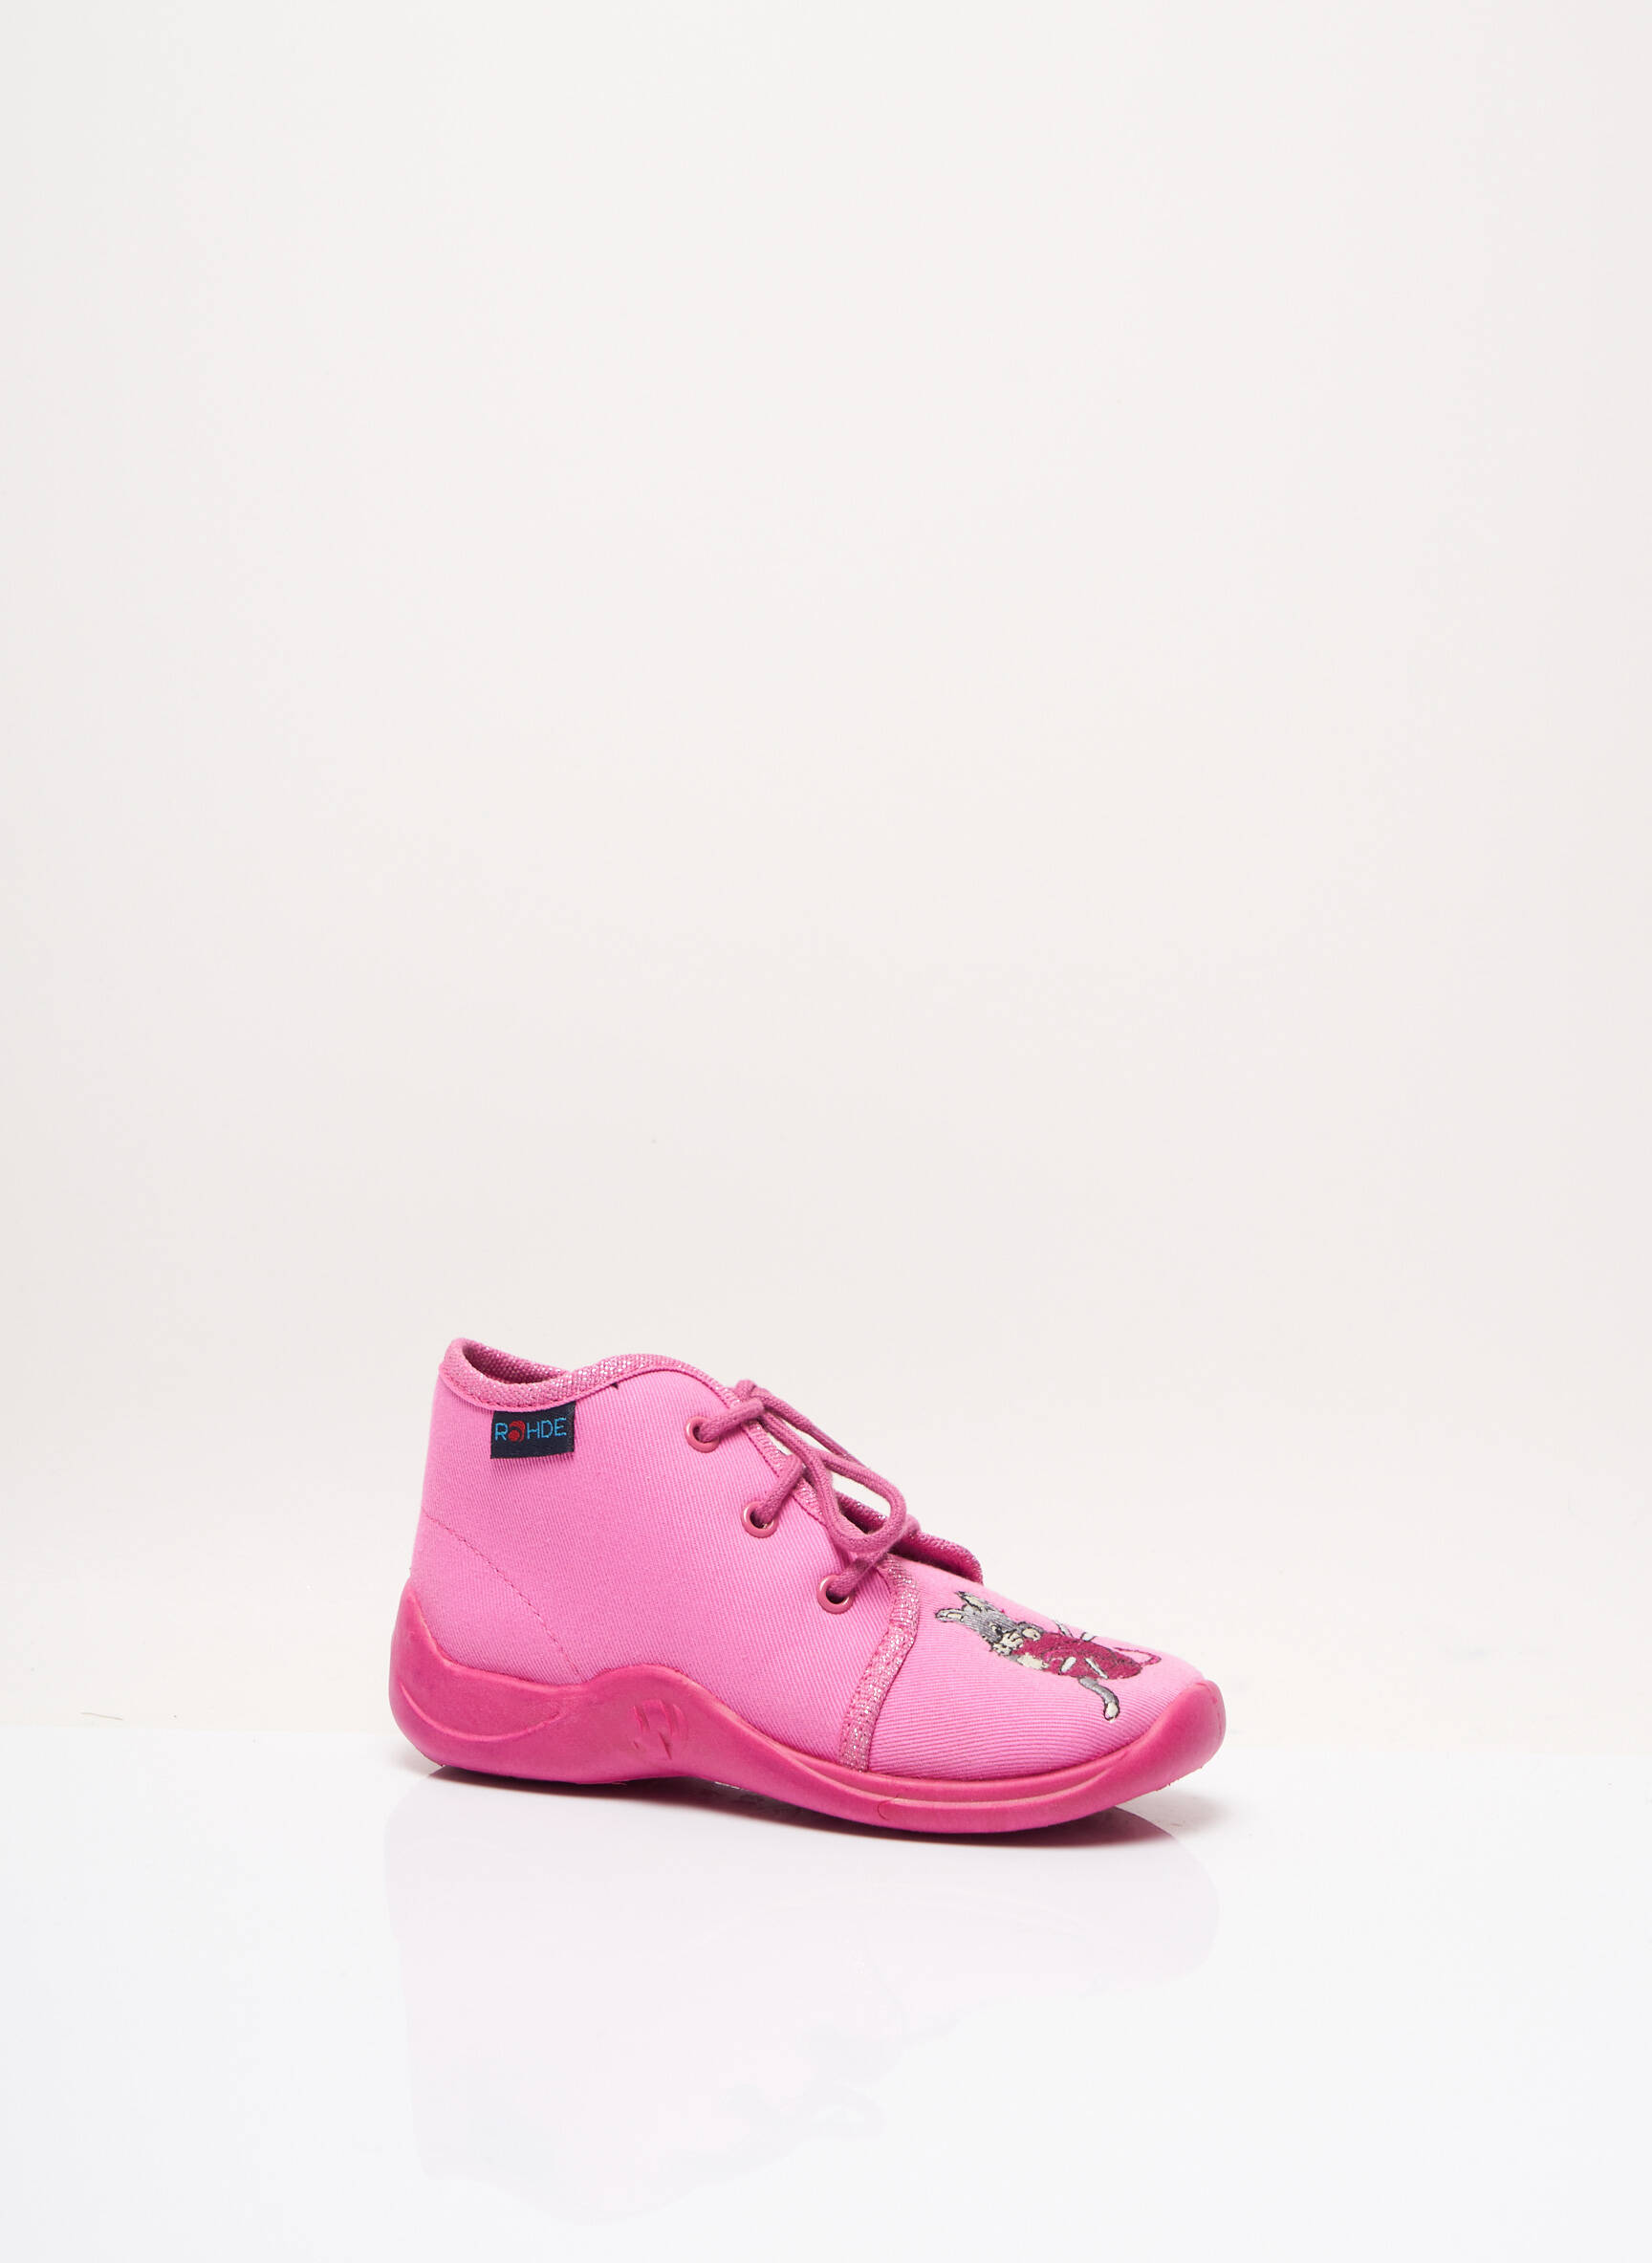 Chausson Sneakers Nike Rose